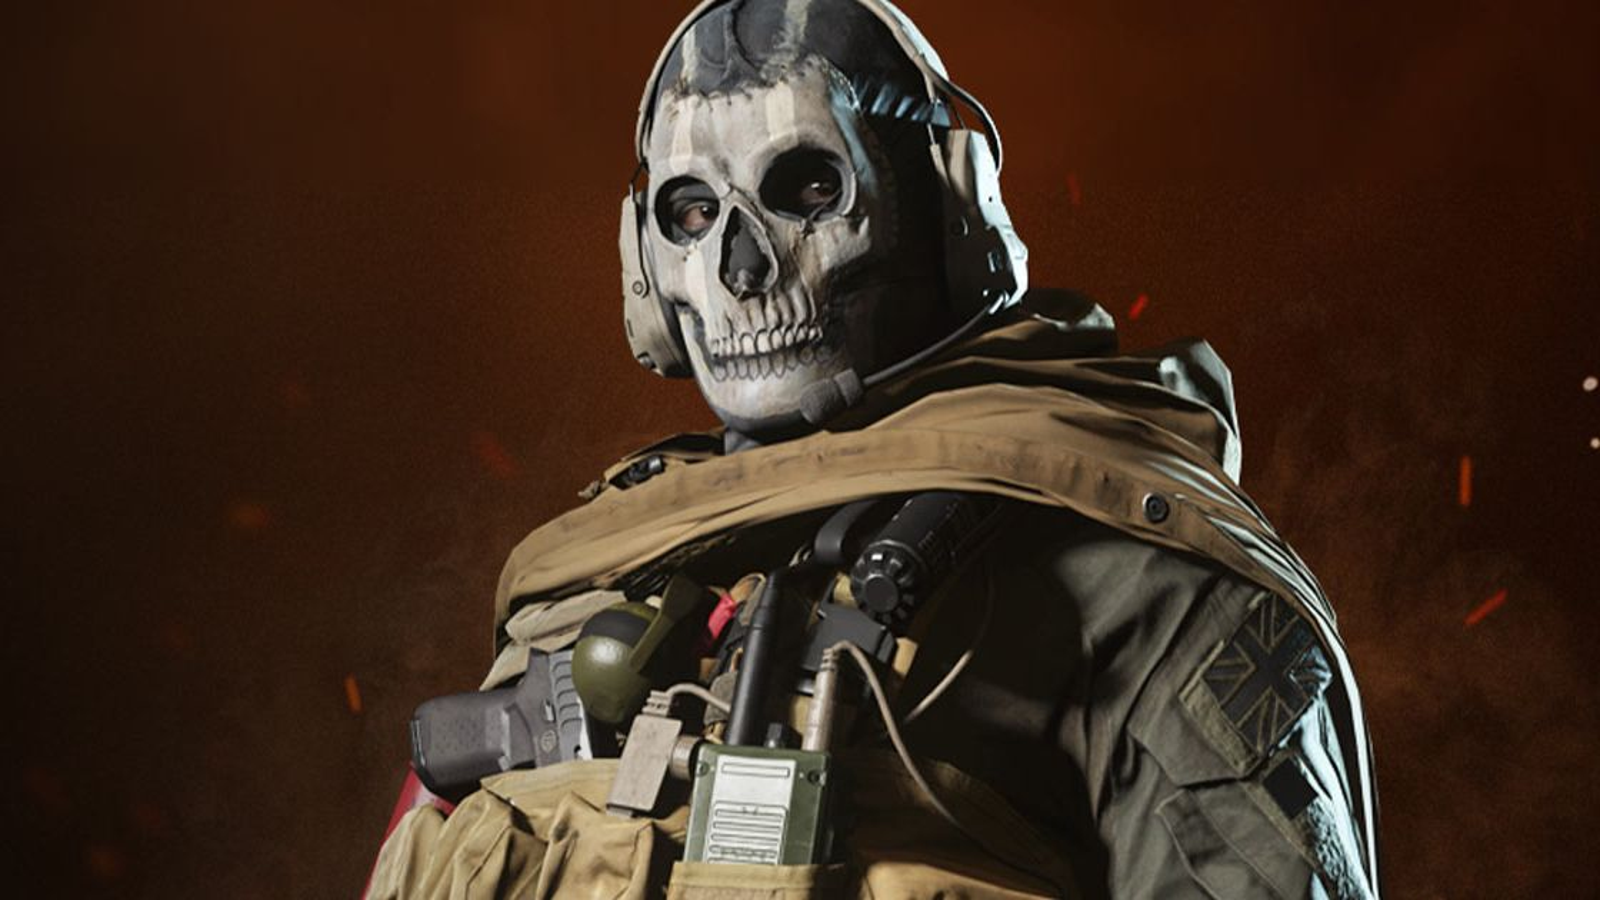 Ghost character from call of duty: modern warfare 2